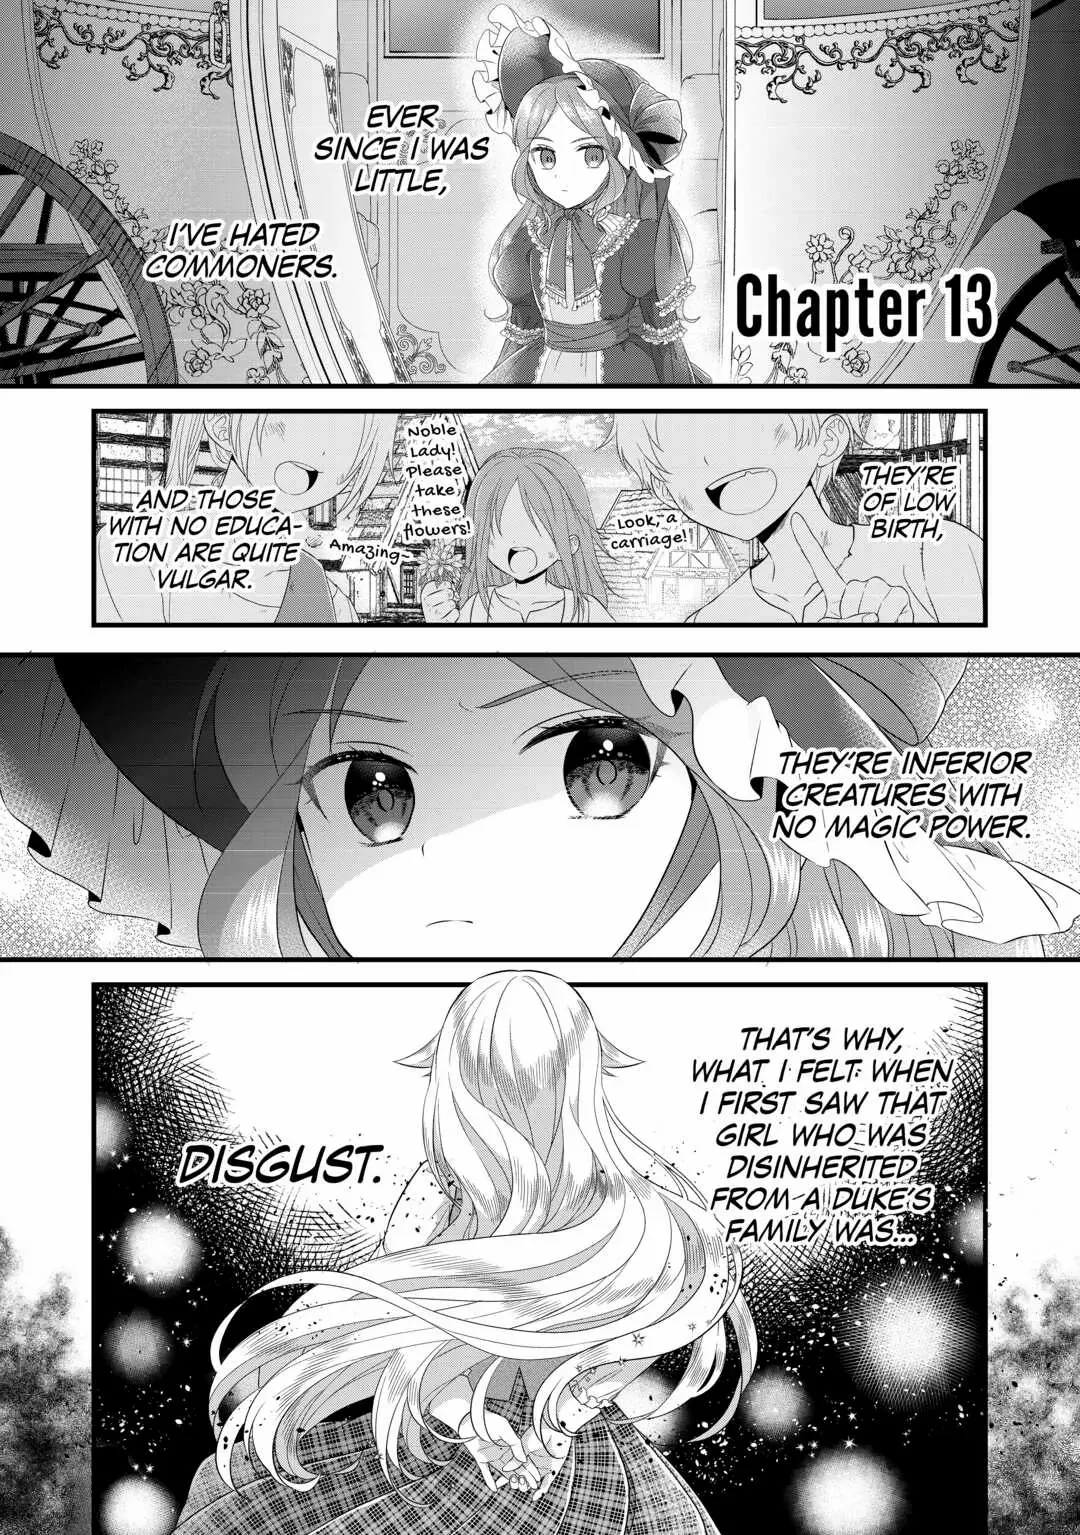 I Reincarnated Into A Ducal House And Was Immediately Branded As Disqualified To Be The Heir, But I'm Continuing On With My Life! - Page 1